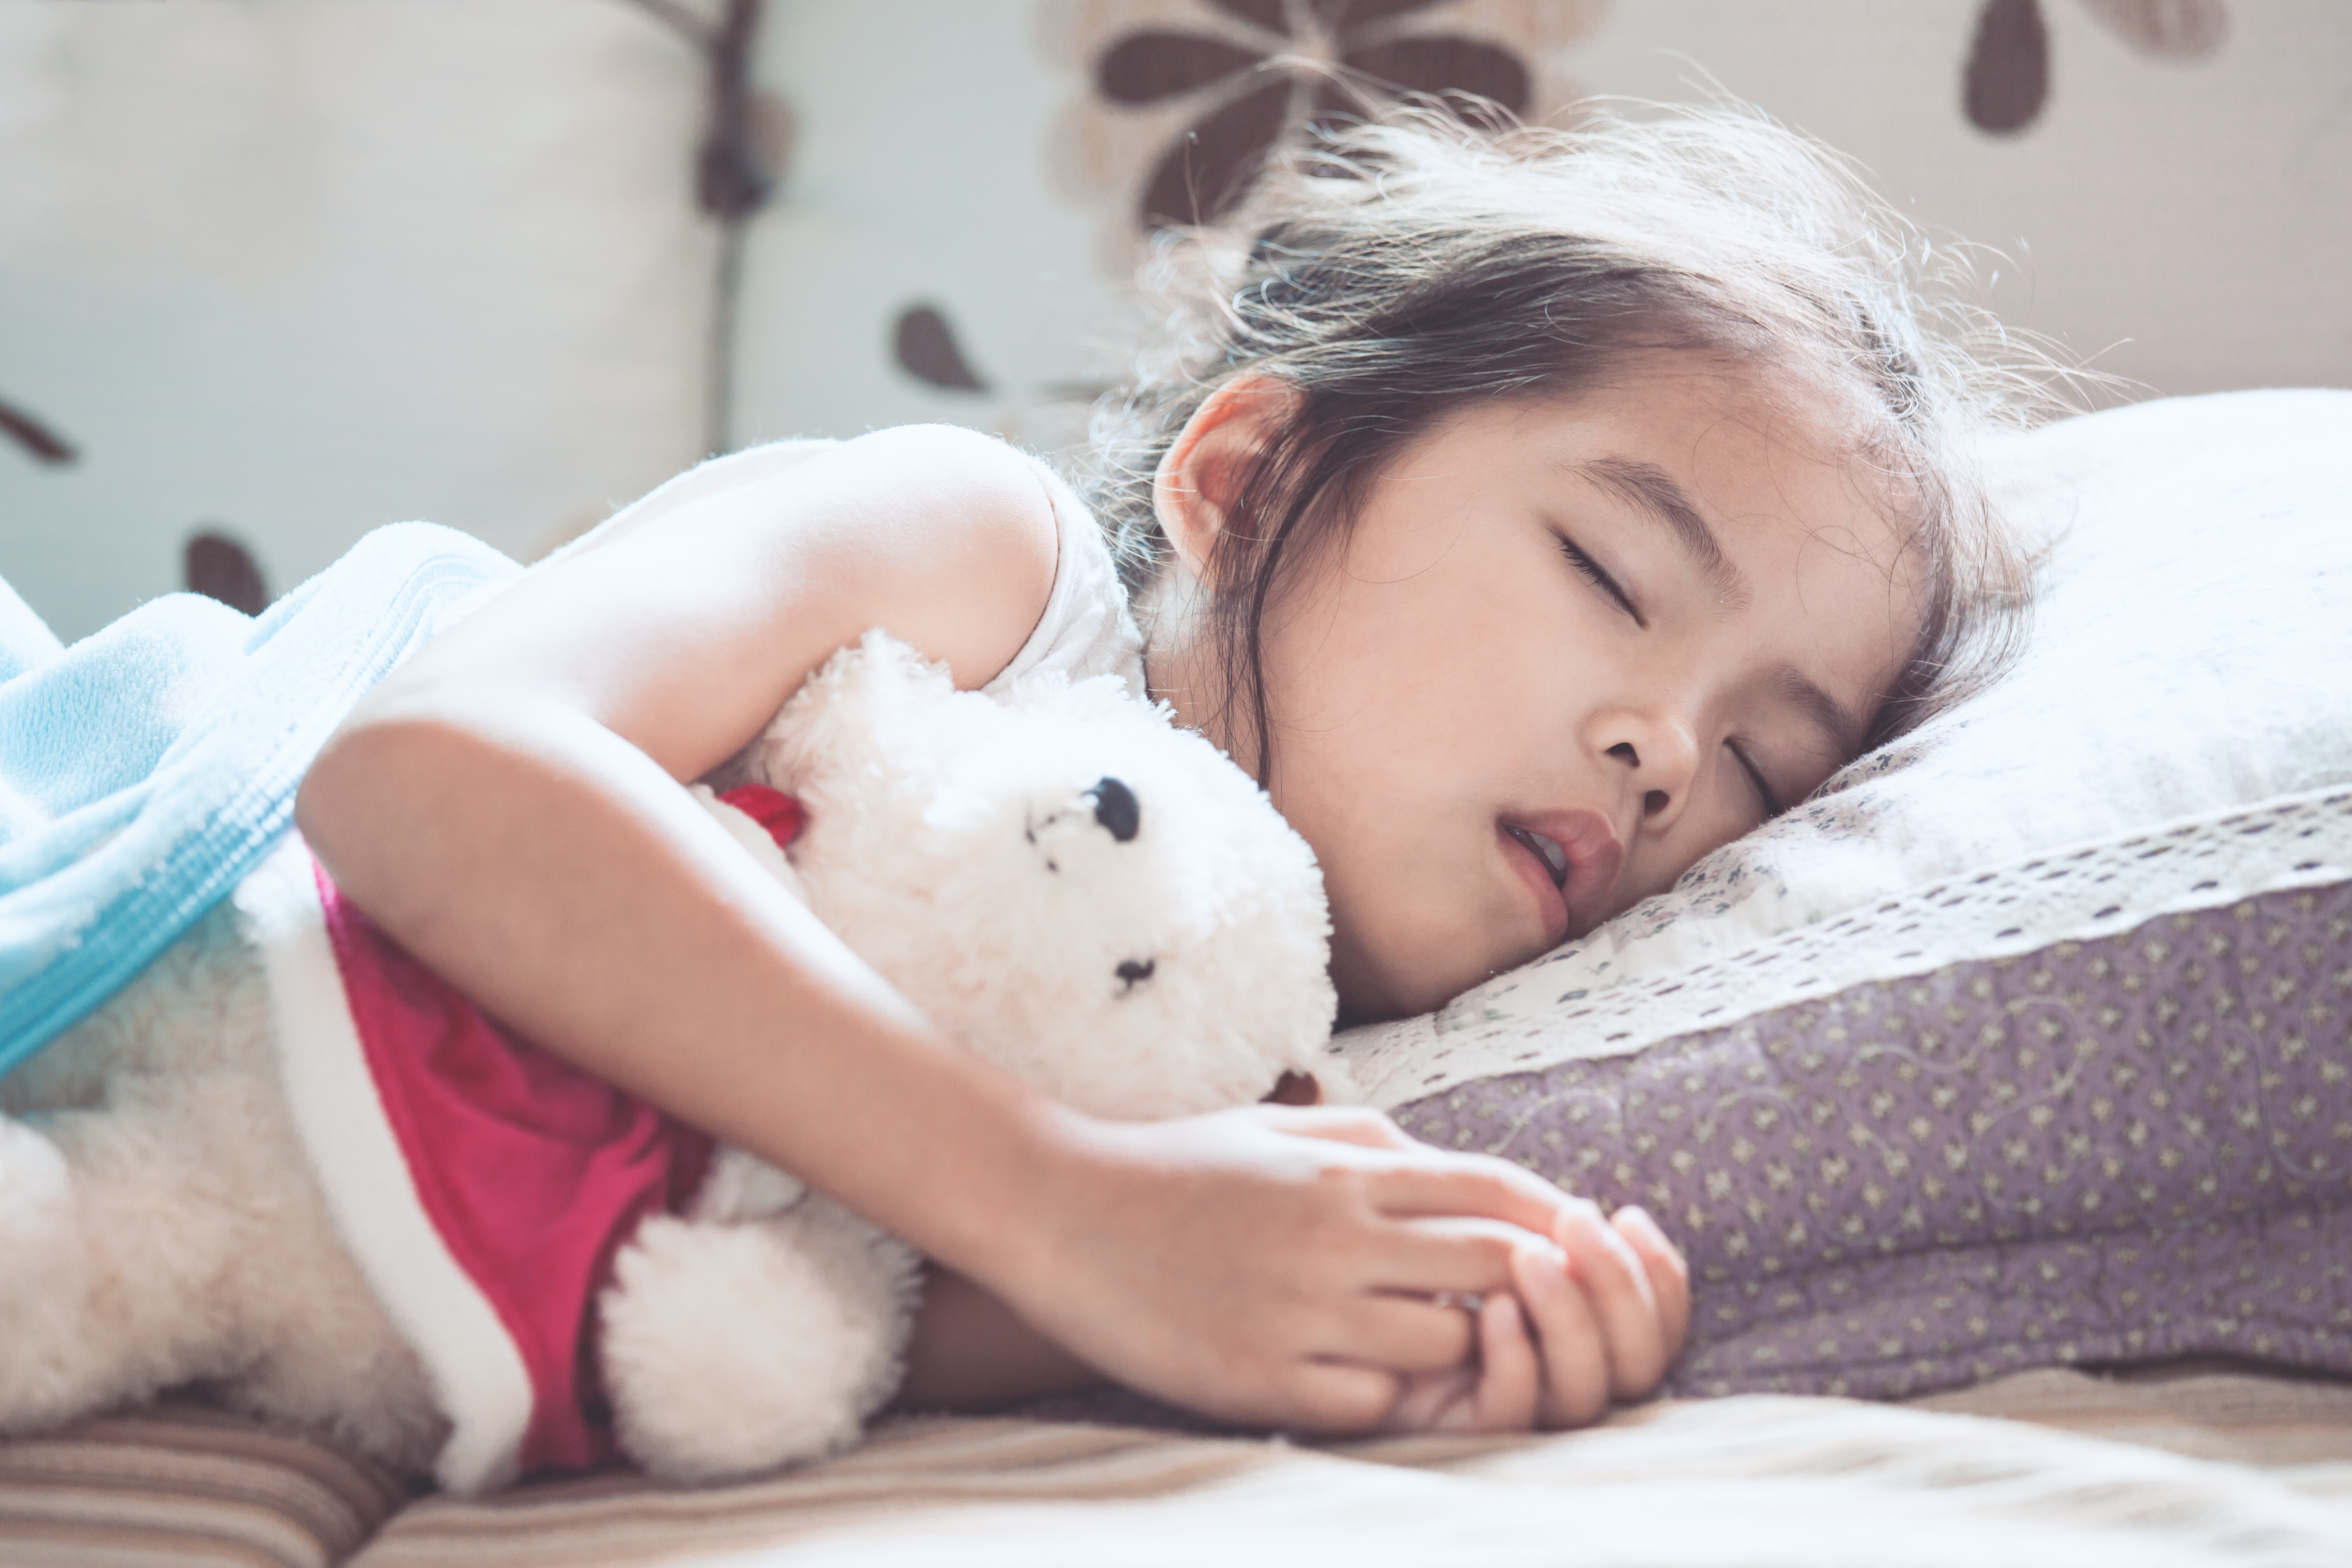 Sweet dreams: Naptime basics for infants and toddlers | UK Healthcare